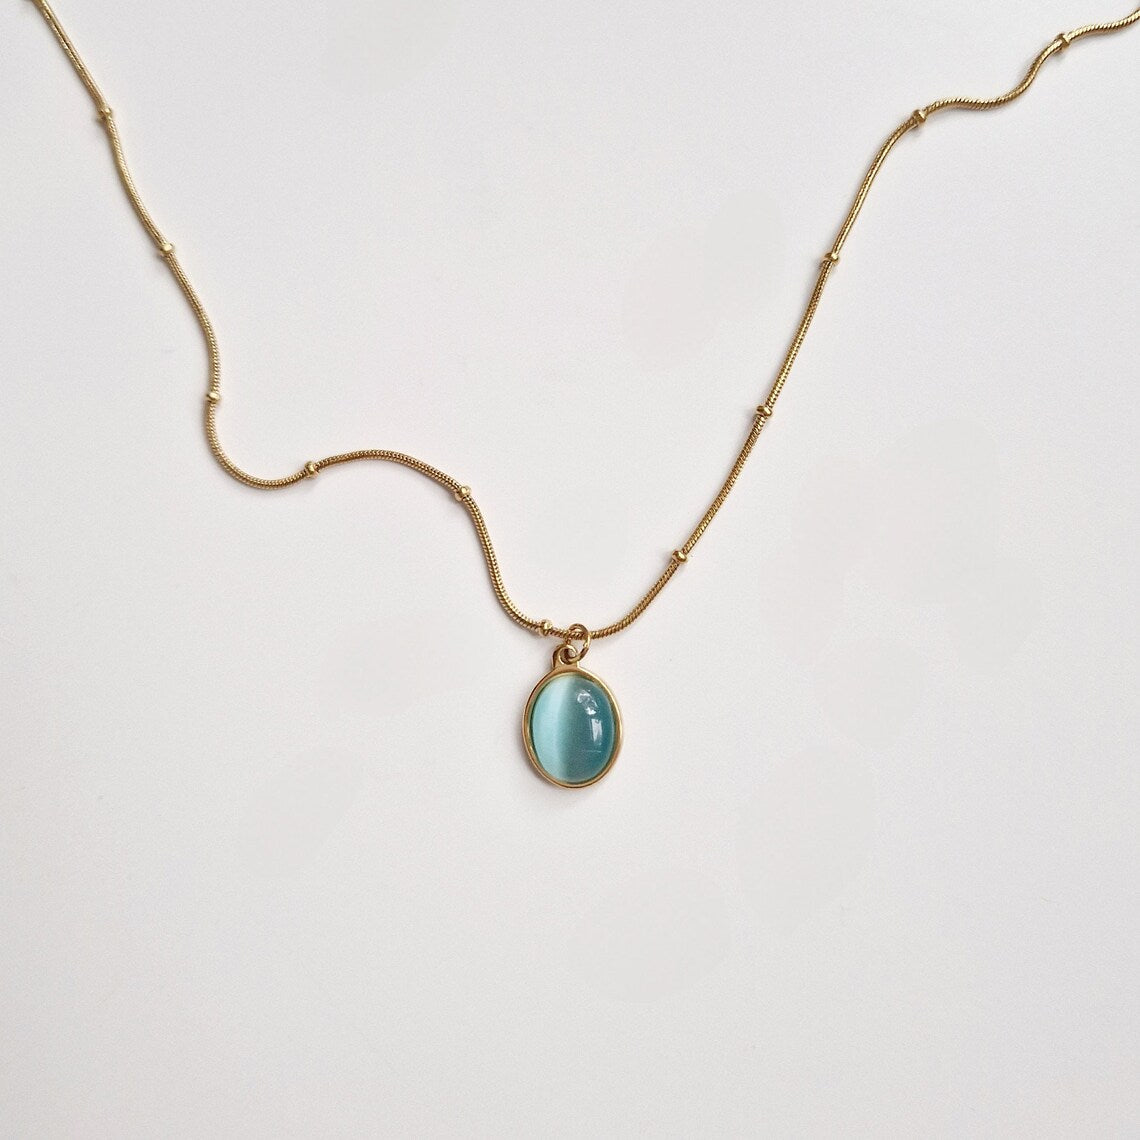 a gold beaded necklace with an aquamarine circle pendant